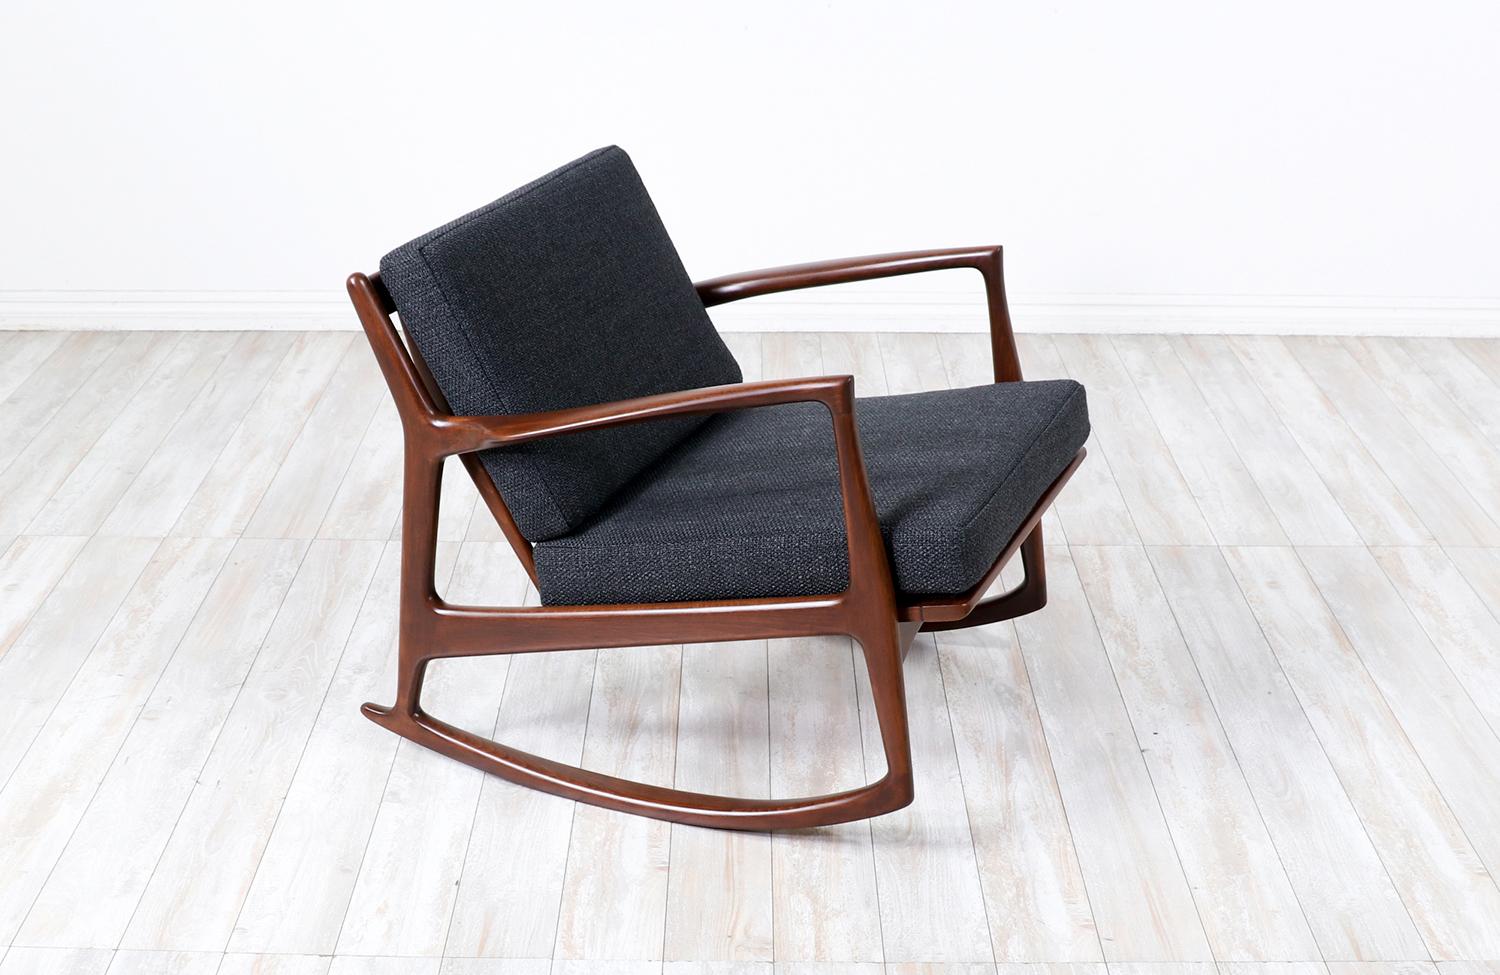 Stunning rocking chair designed by Danish furniture designer Ib-Kofod Larsen for Selig in Denmark c. 1960’s. Featuring a walnut-stained beechwood frame with a slatted back. New high-density foam cushions are newly reupholstered in a dark blue tweed